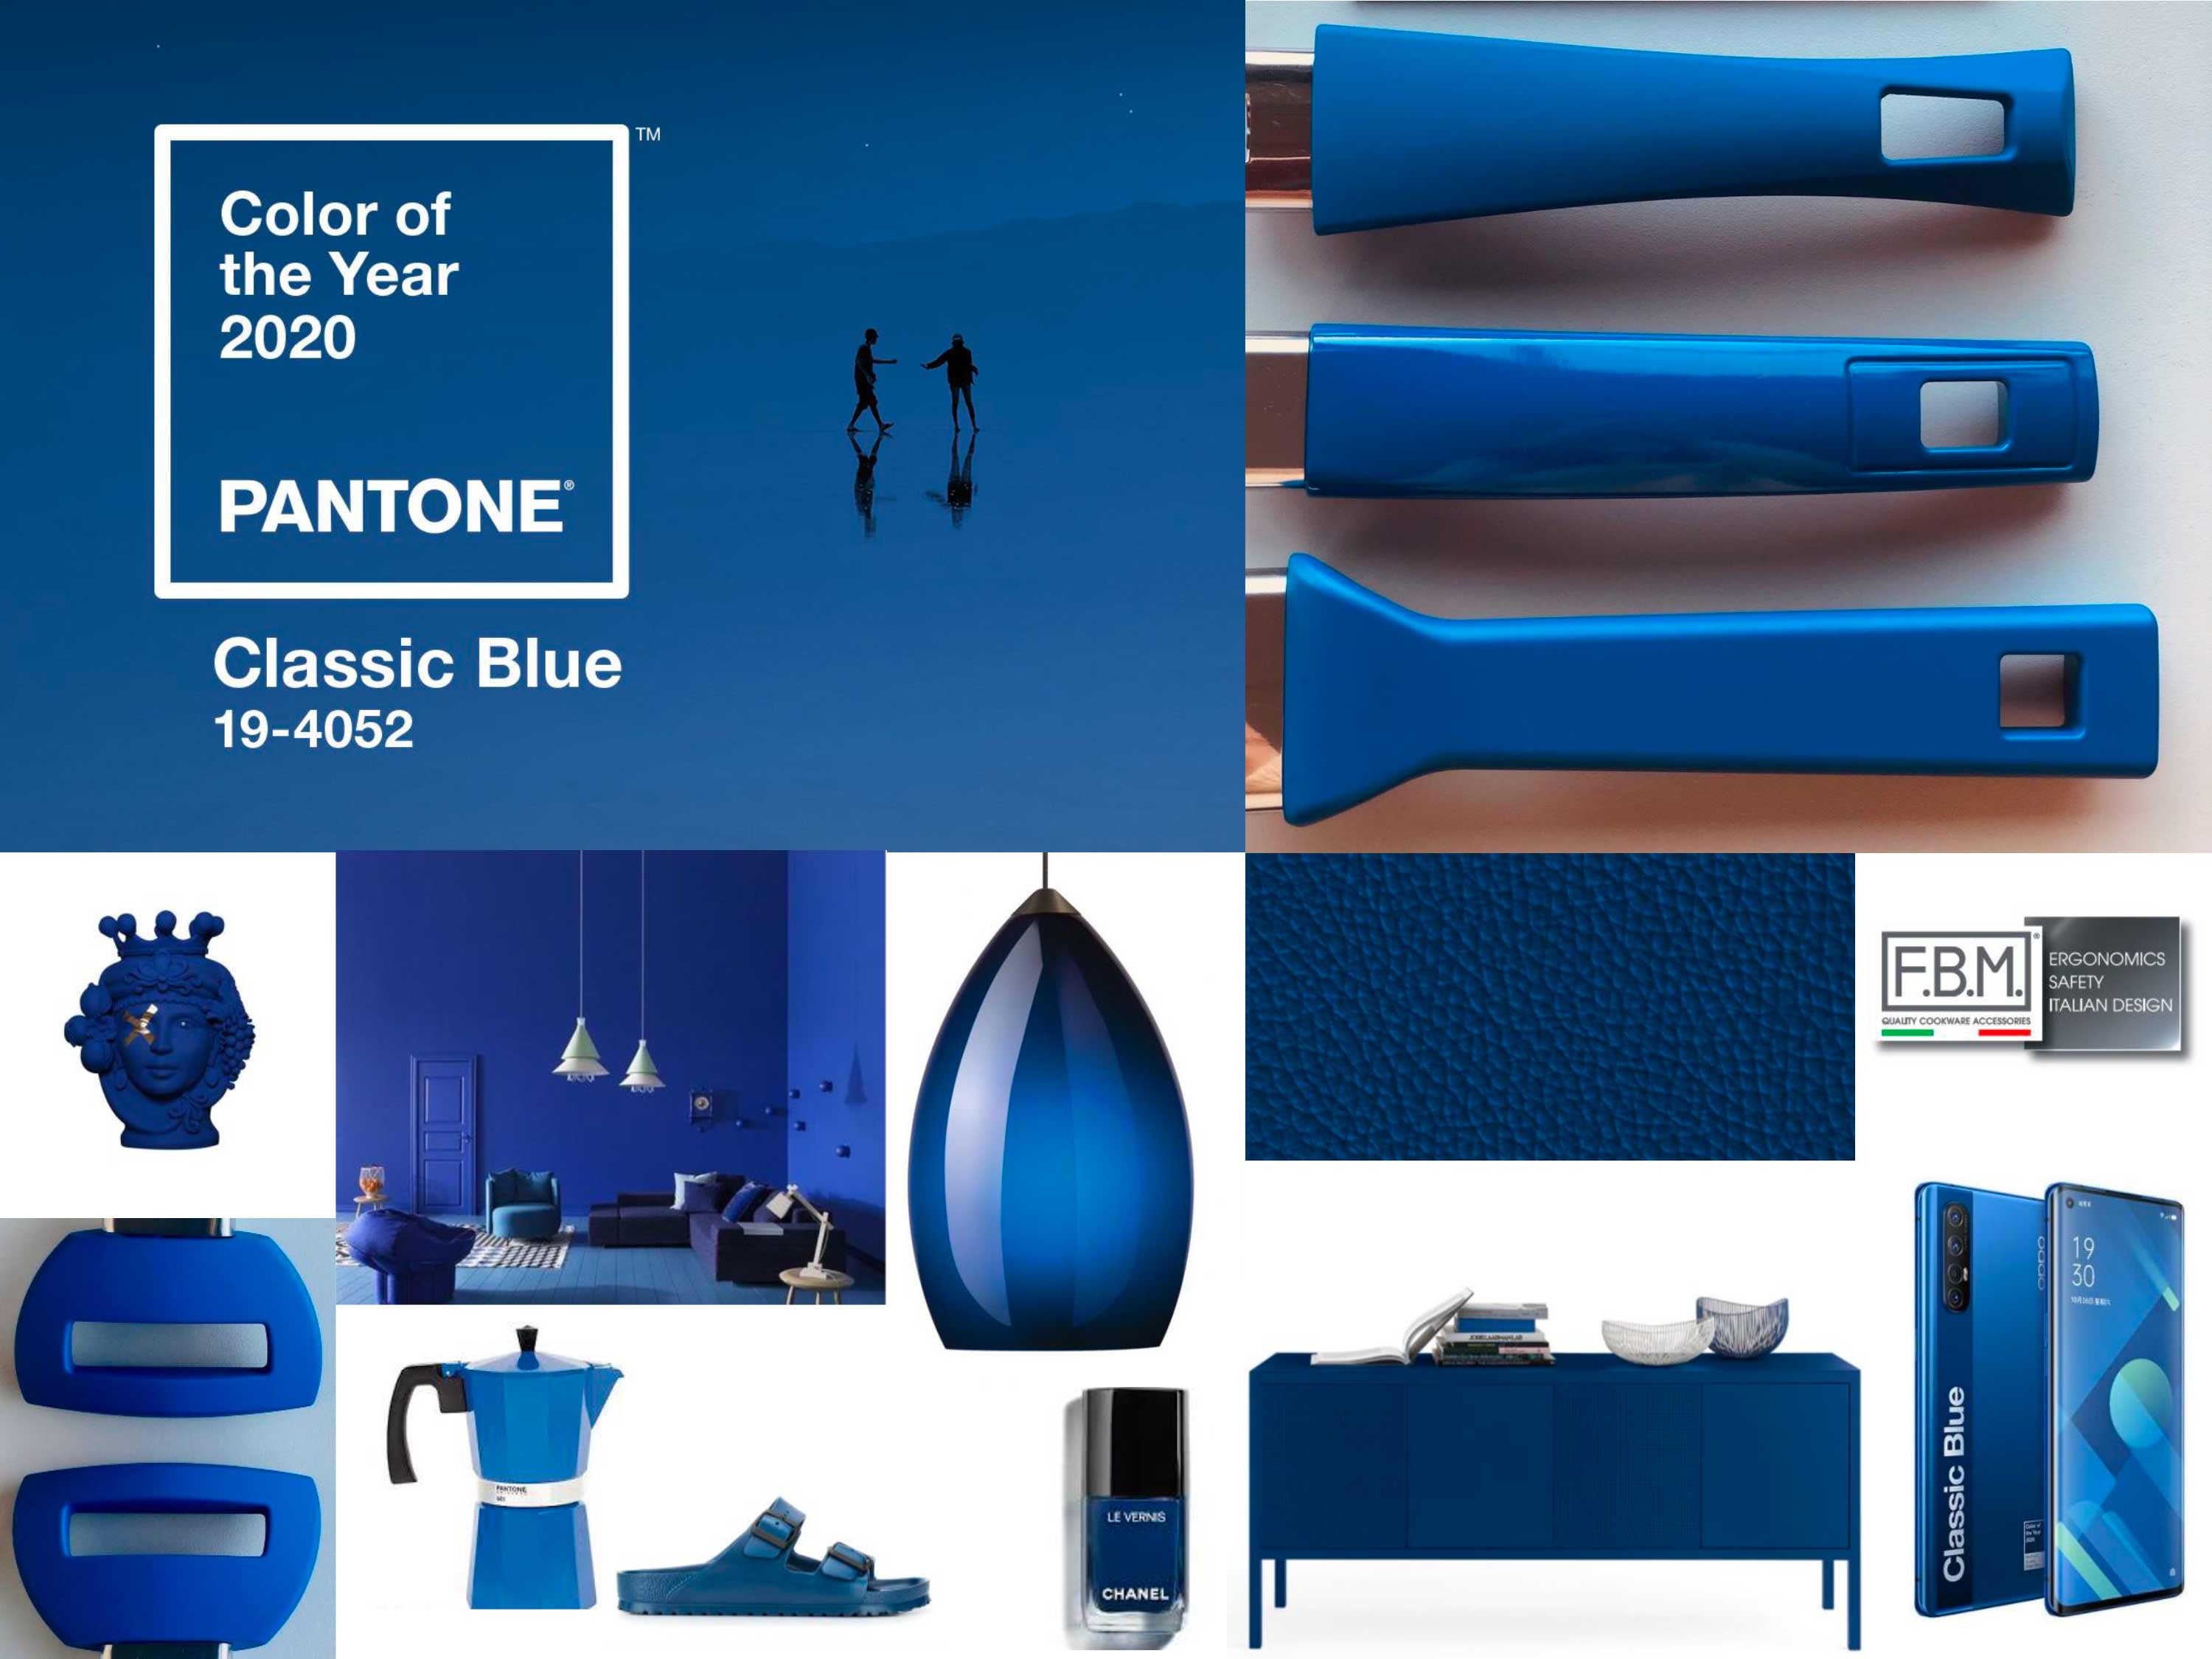 Classic Blue Named Pantone Color of 2020